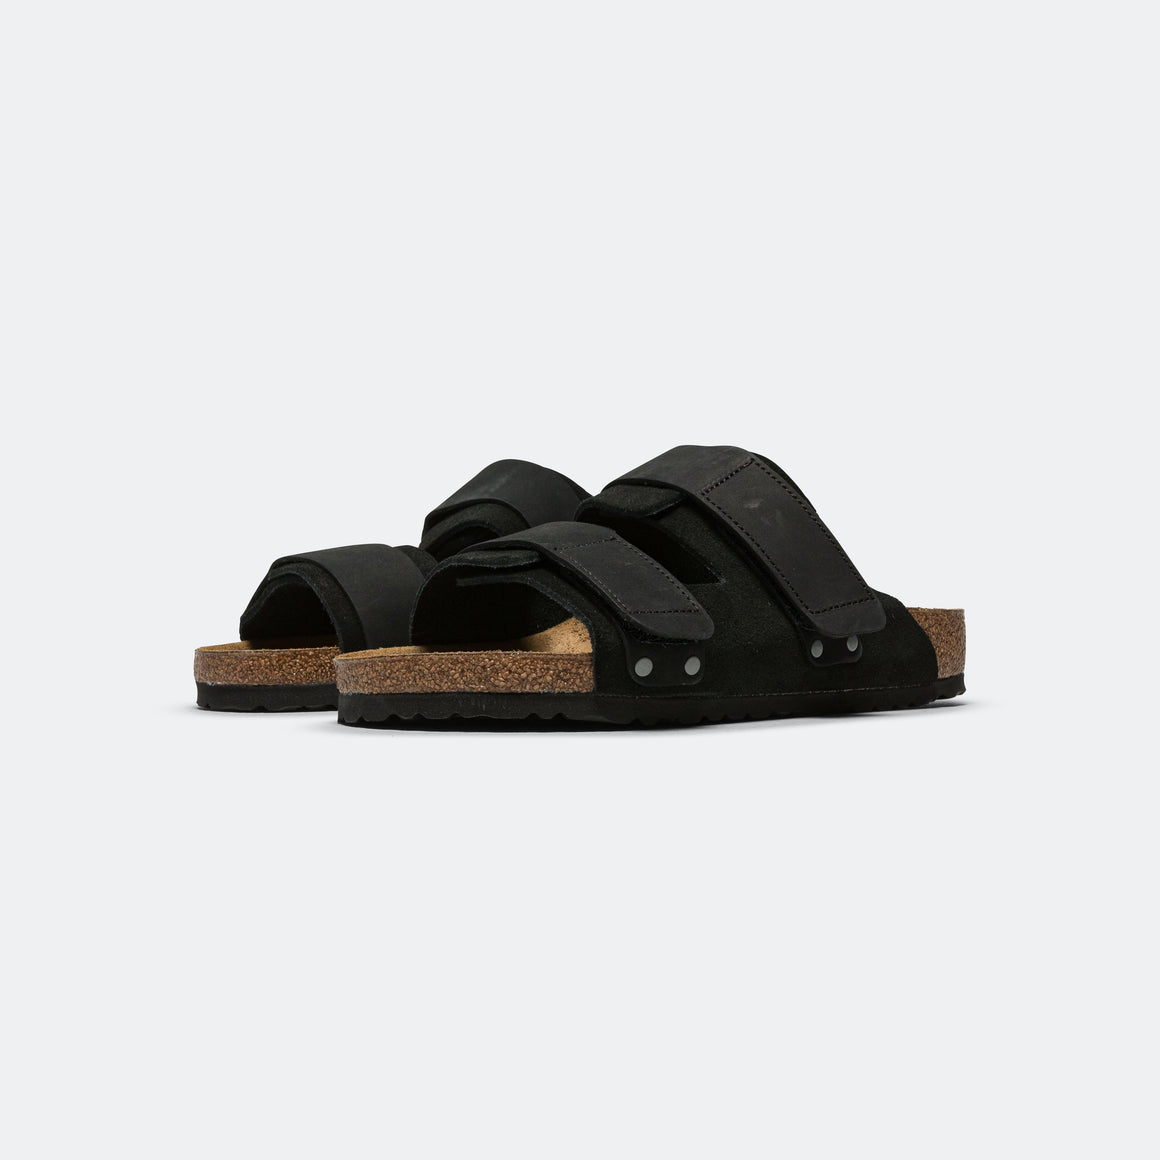 Birkenstock - Uji - Black Suede Leather - UP THERE